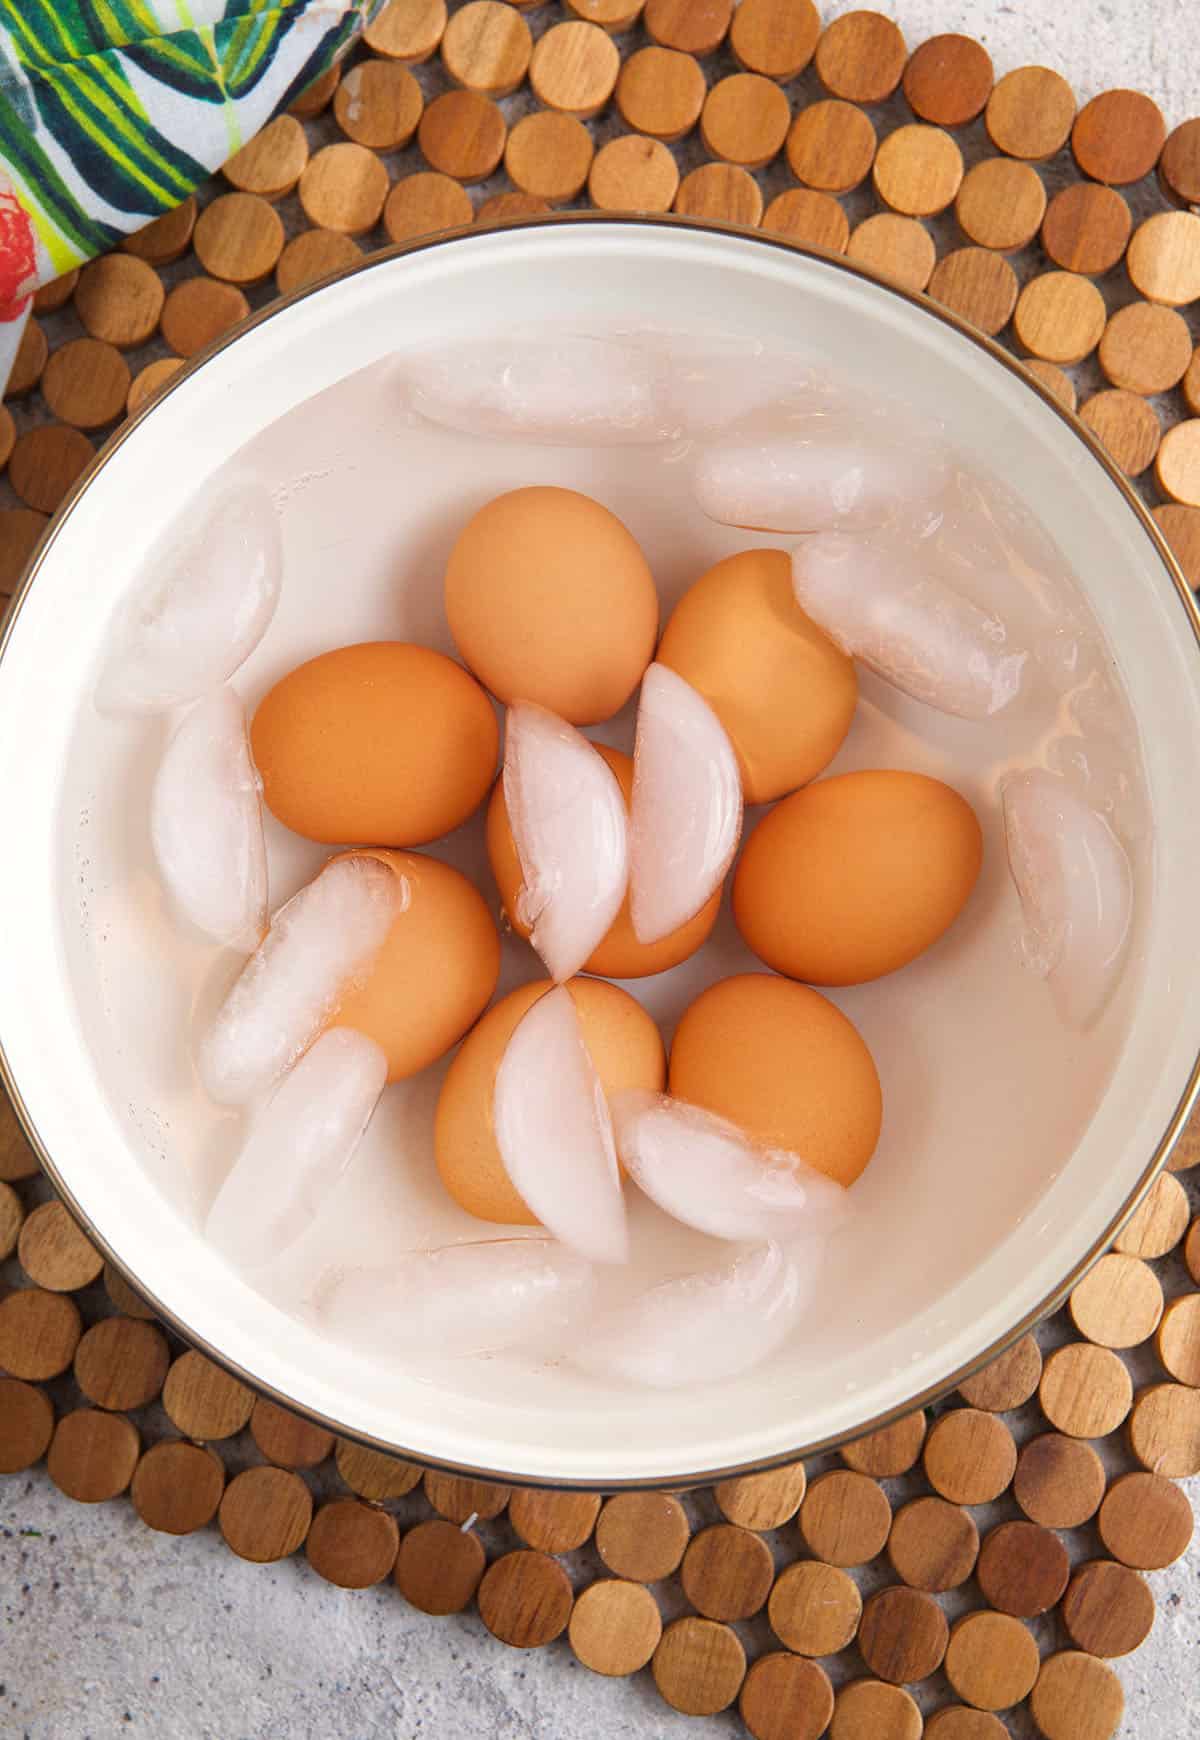 Hard boiled eggs are placed in a bowl of ice water. 